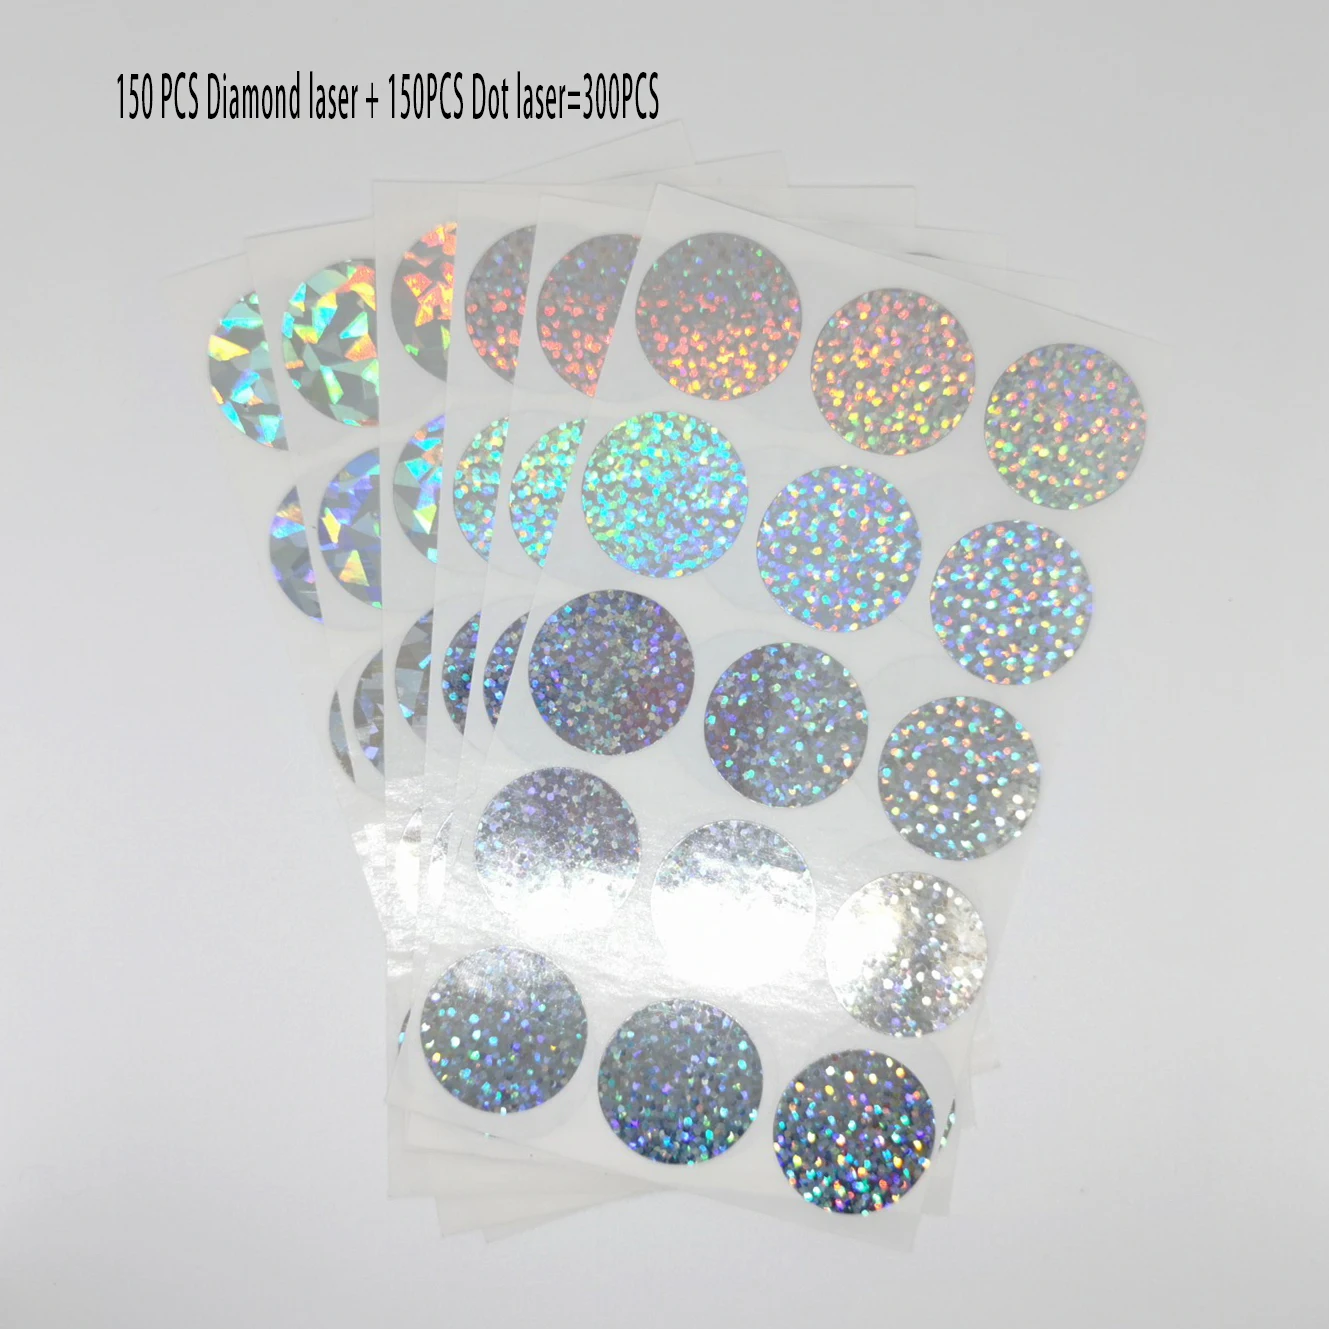 

300pcs 1"Inch Round Scratch Off Stickers 150pcs Two Kind Diamond laser Color Metallic Hologram game Scratch Sticker Wedding card